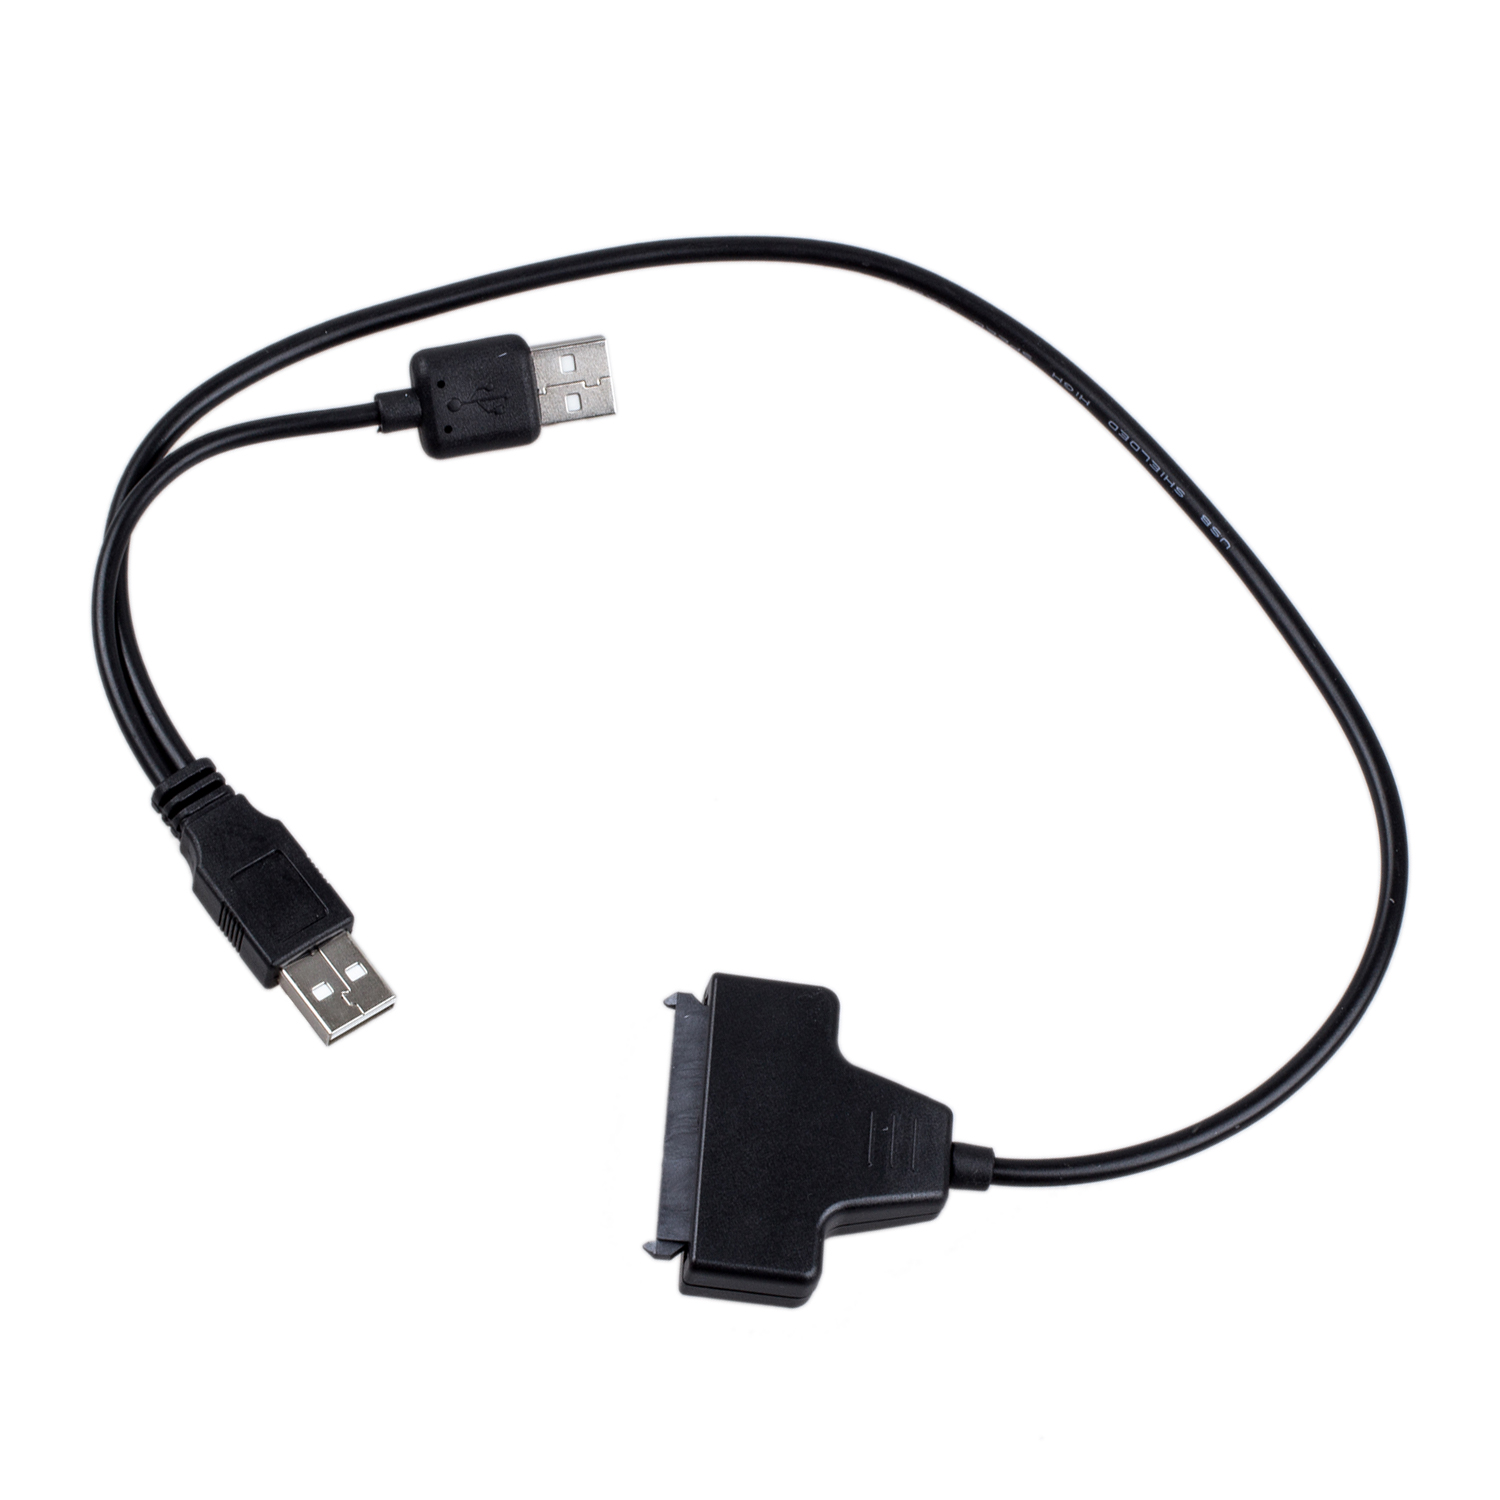 New USB 2.0 to SATA Serial ATA 15+7 22P Adapter Cable For 2.5